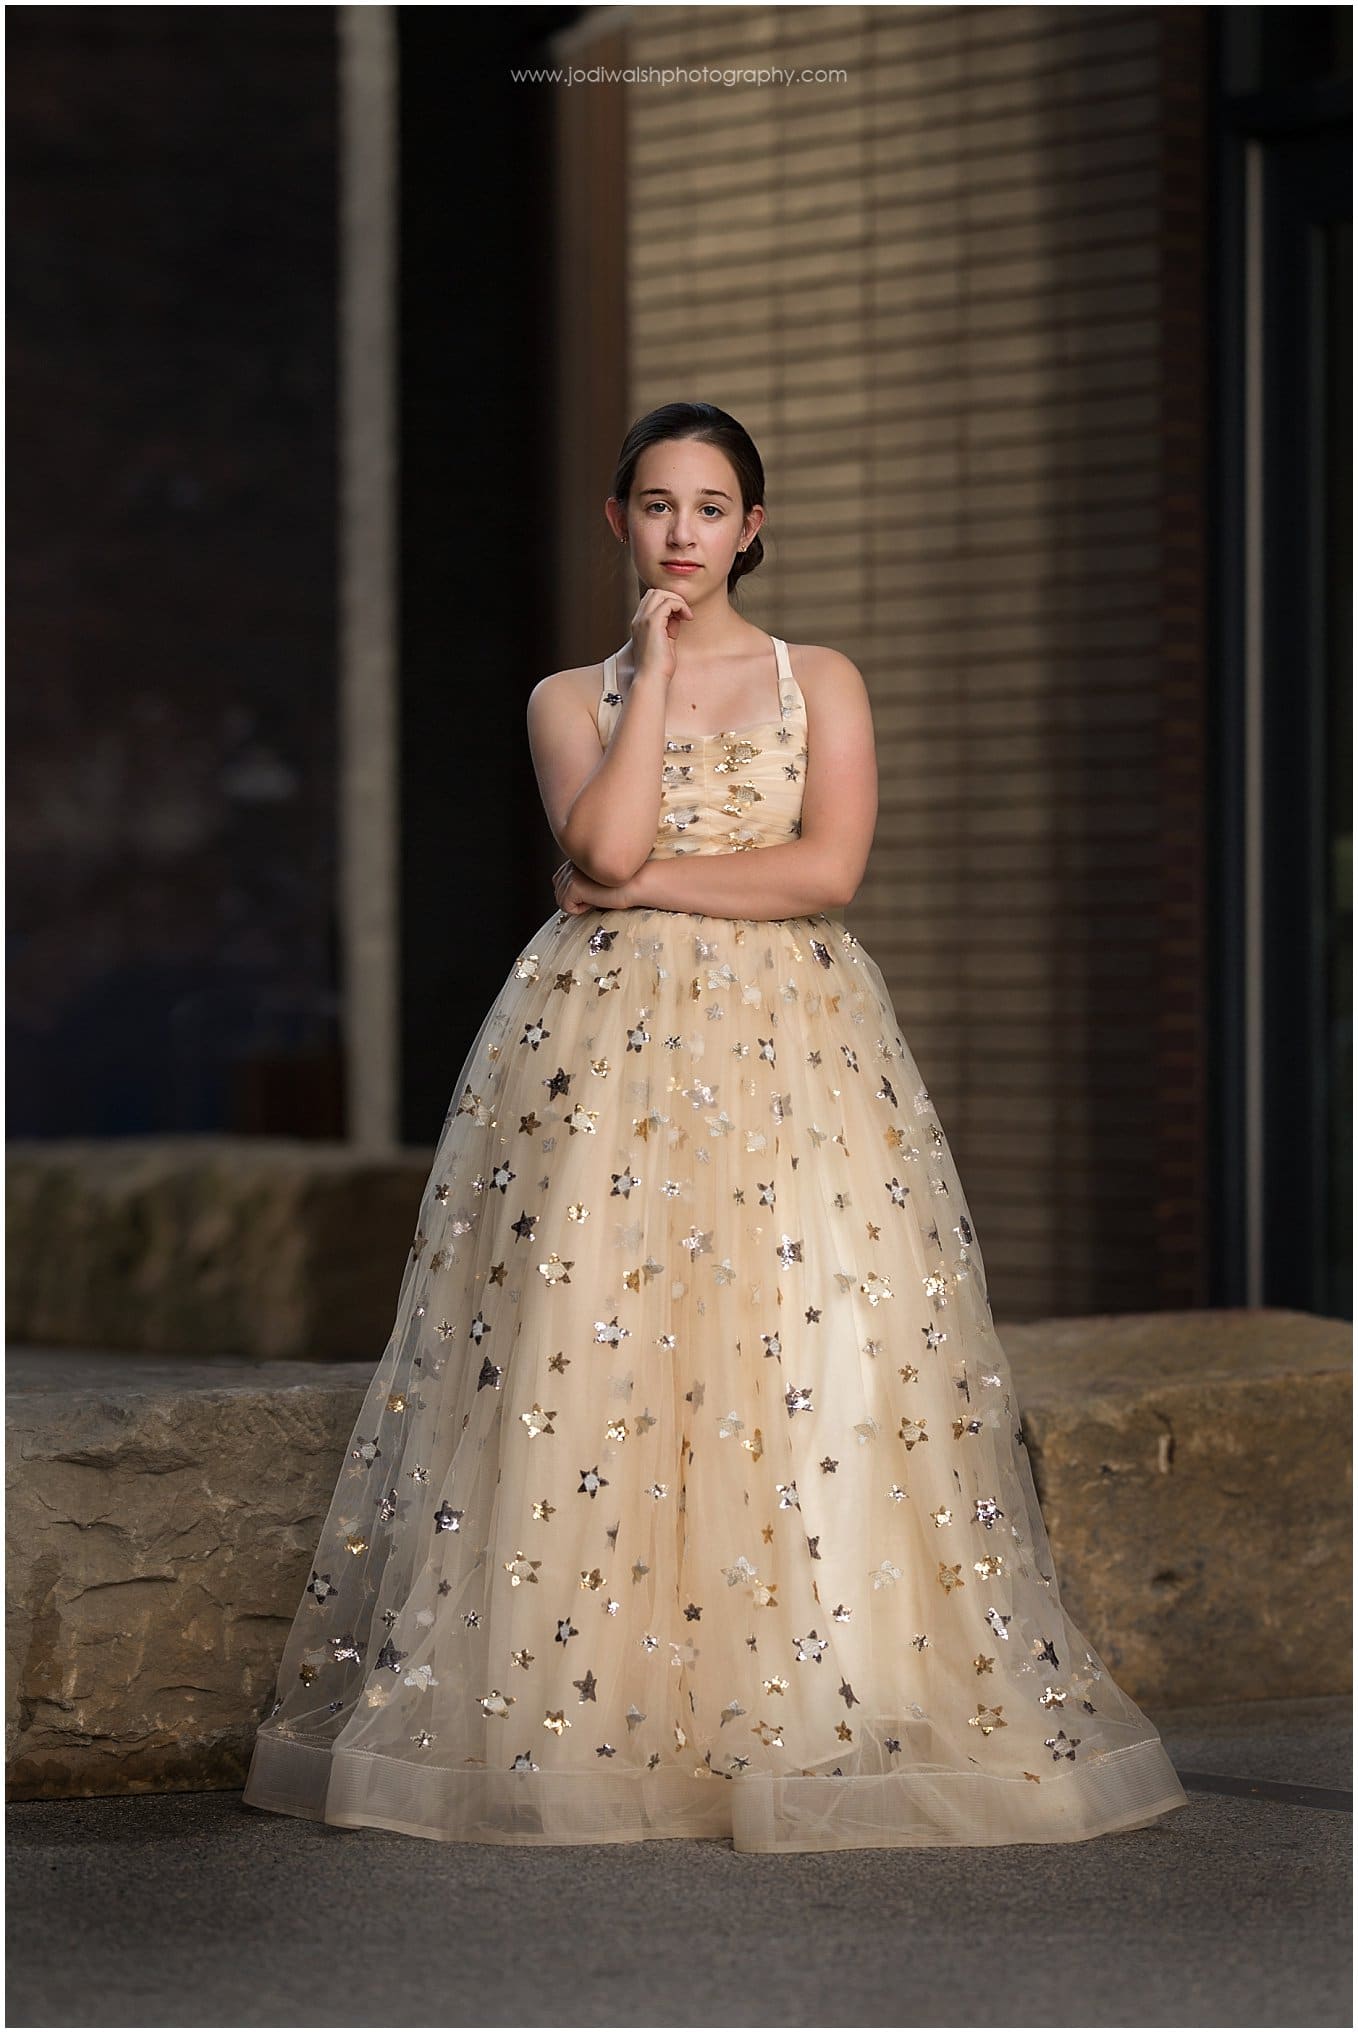 image of a teen girl in a gold princess dress with silver stars. She's standing in a Pittsburgh alley with her arms crossed, looking serious.